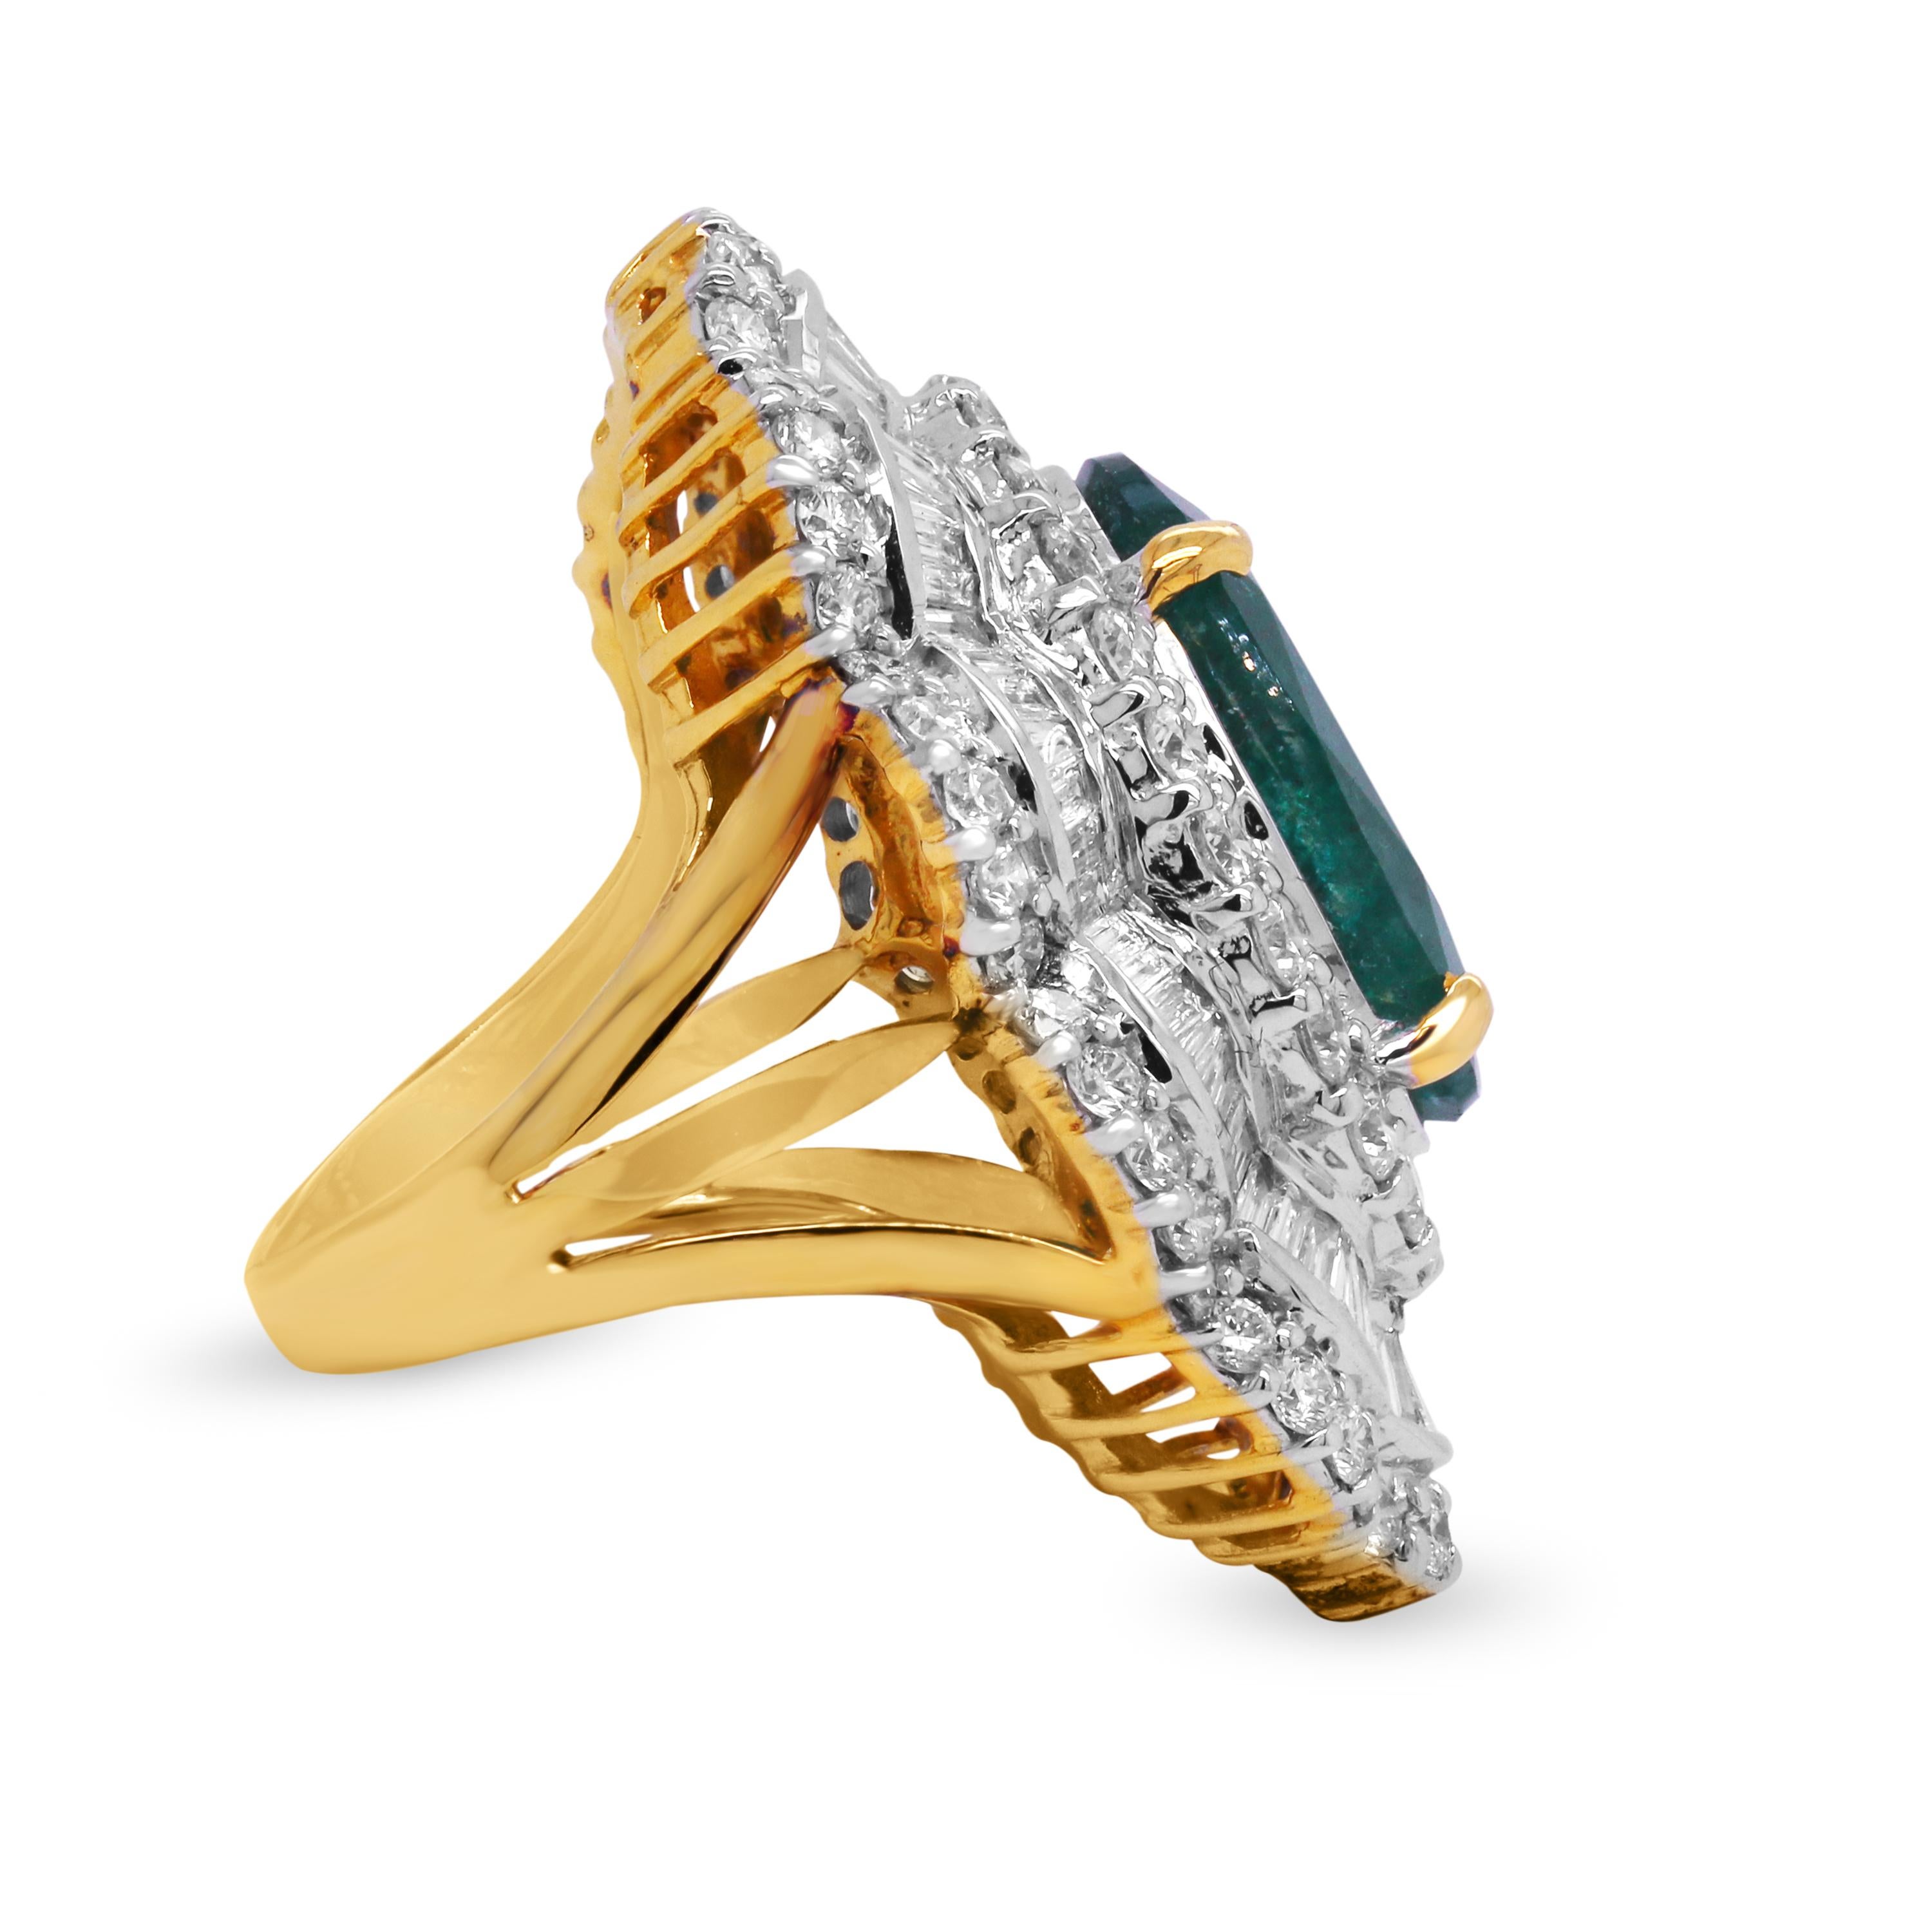 Contemporary 18K Gold Baguette Round Diamond Oval 8 Carat Emerald Center Cocktail Ring For Sale